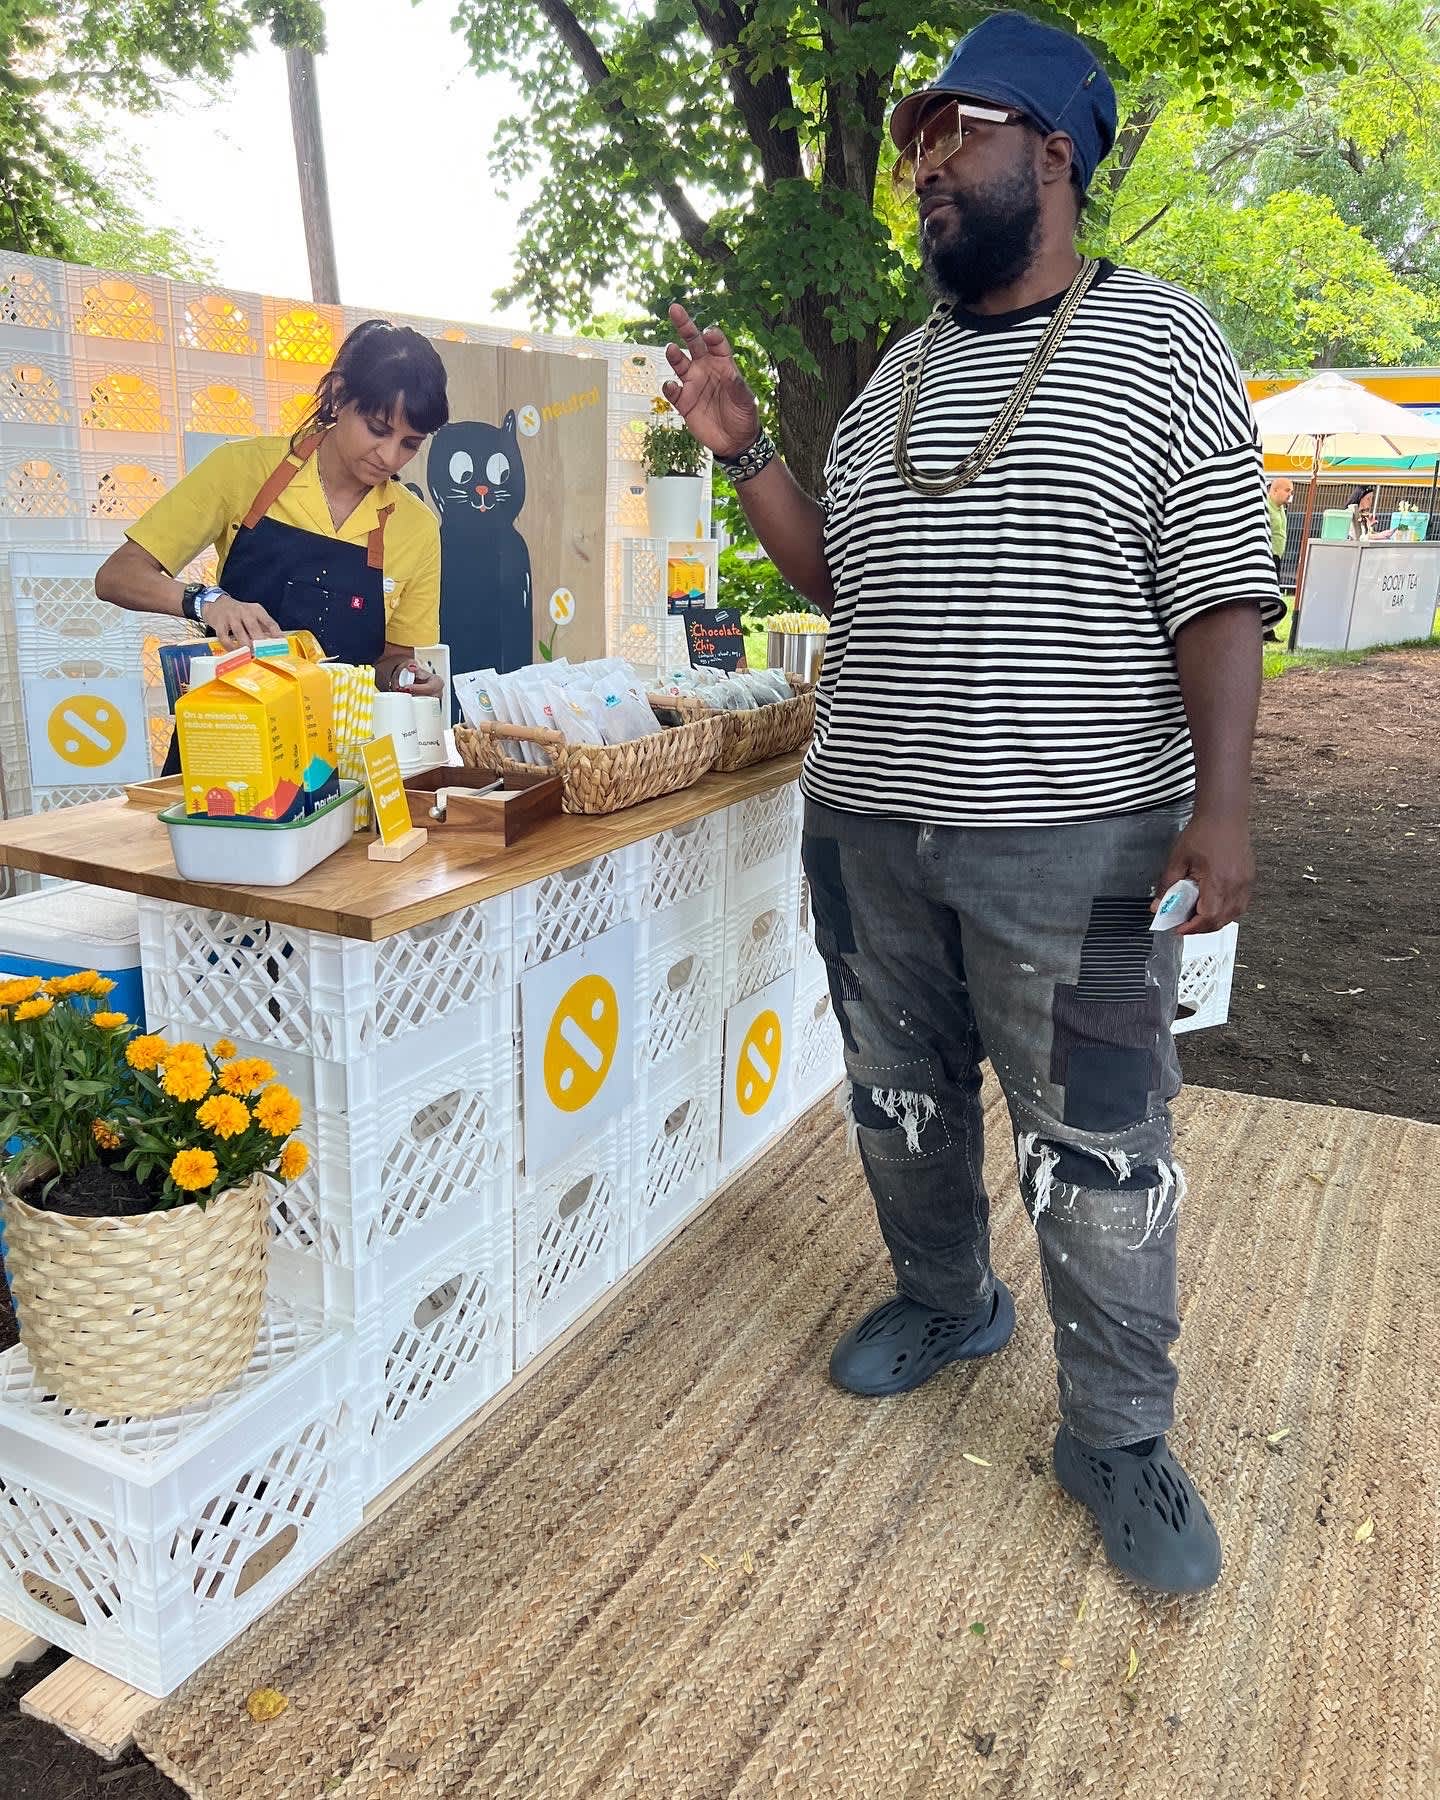 Kavita Patel, vice president of marketing at Neutral, seen pouring milk at a picnic with Questlove, an investor in the startup. This photo was taken in June in Philadelphia at the Roots picnic in Fairmount Park.